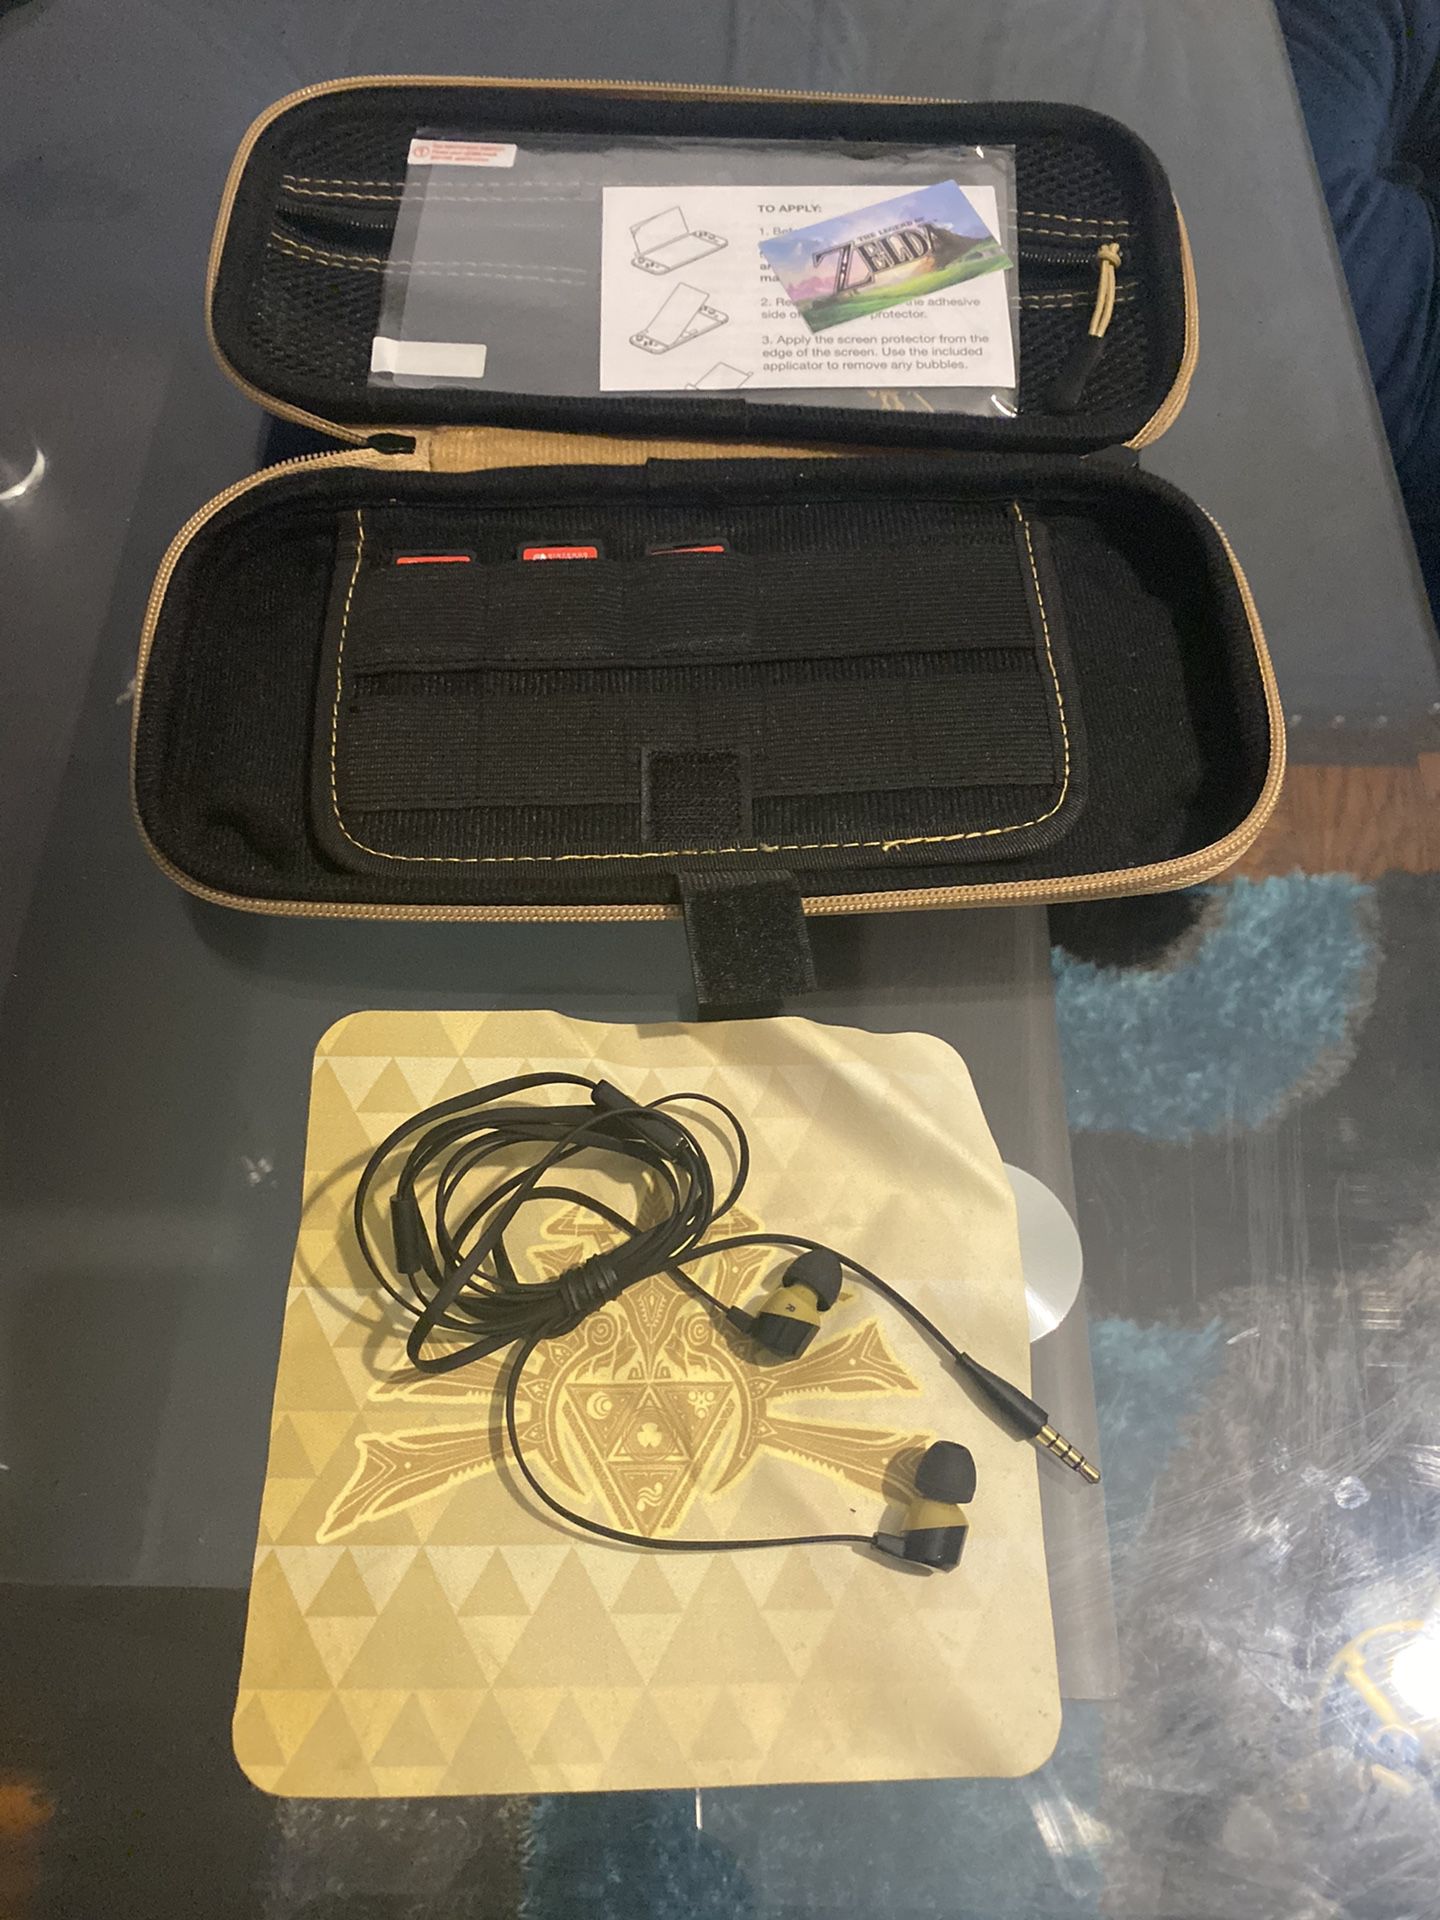 Nintendo switch with 3 games and Zelda case ,headphones and screen protecter